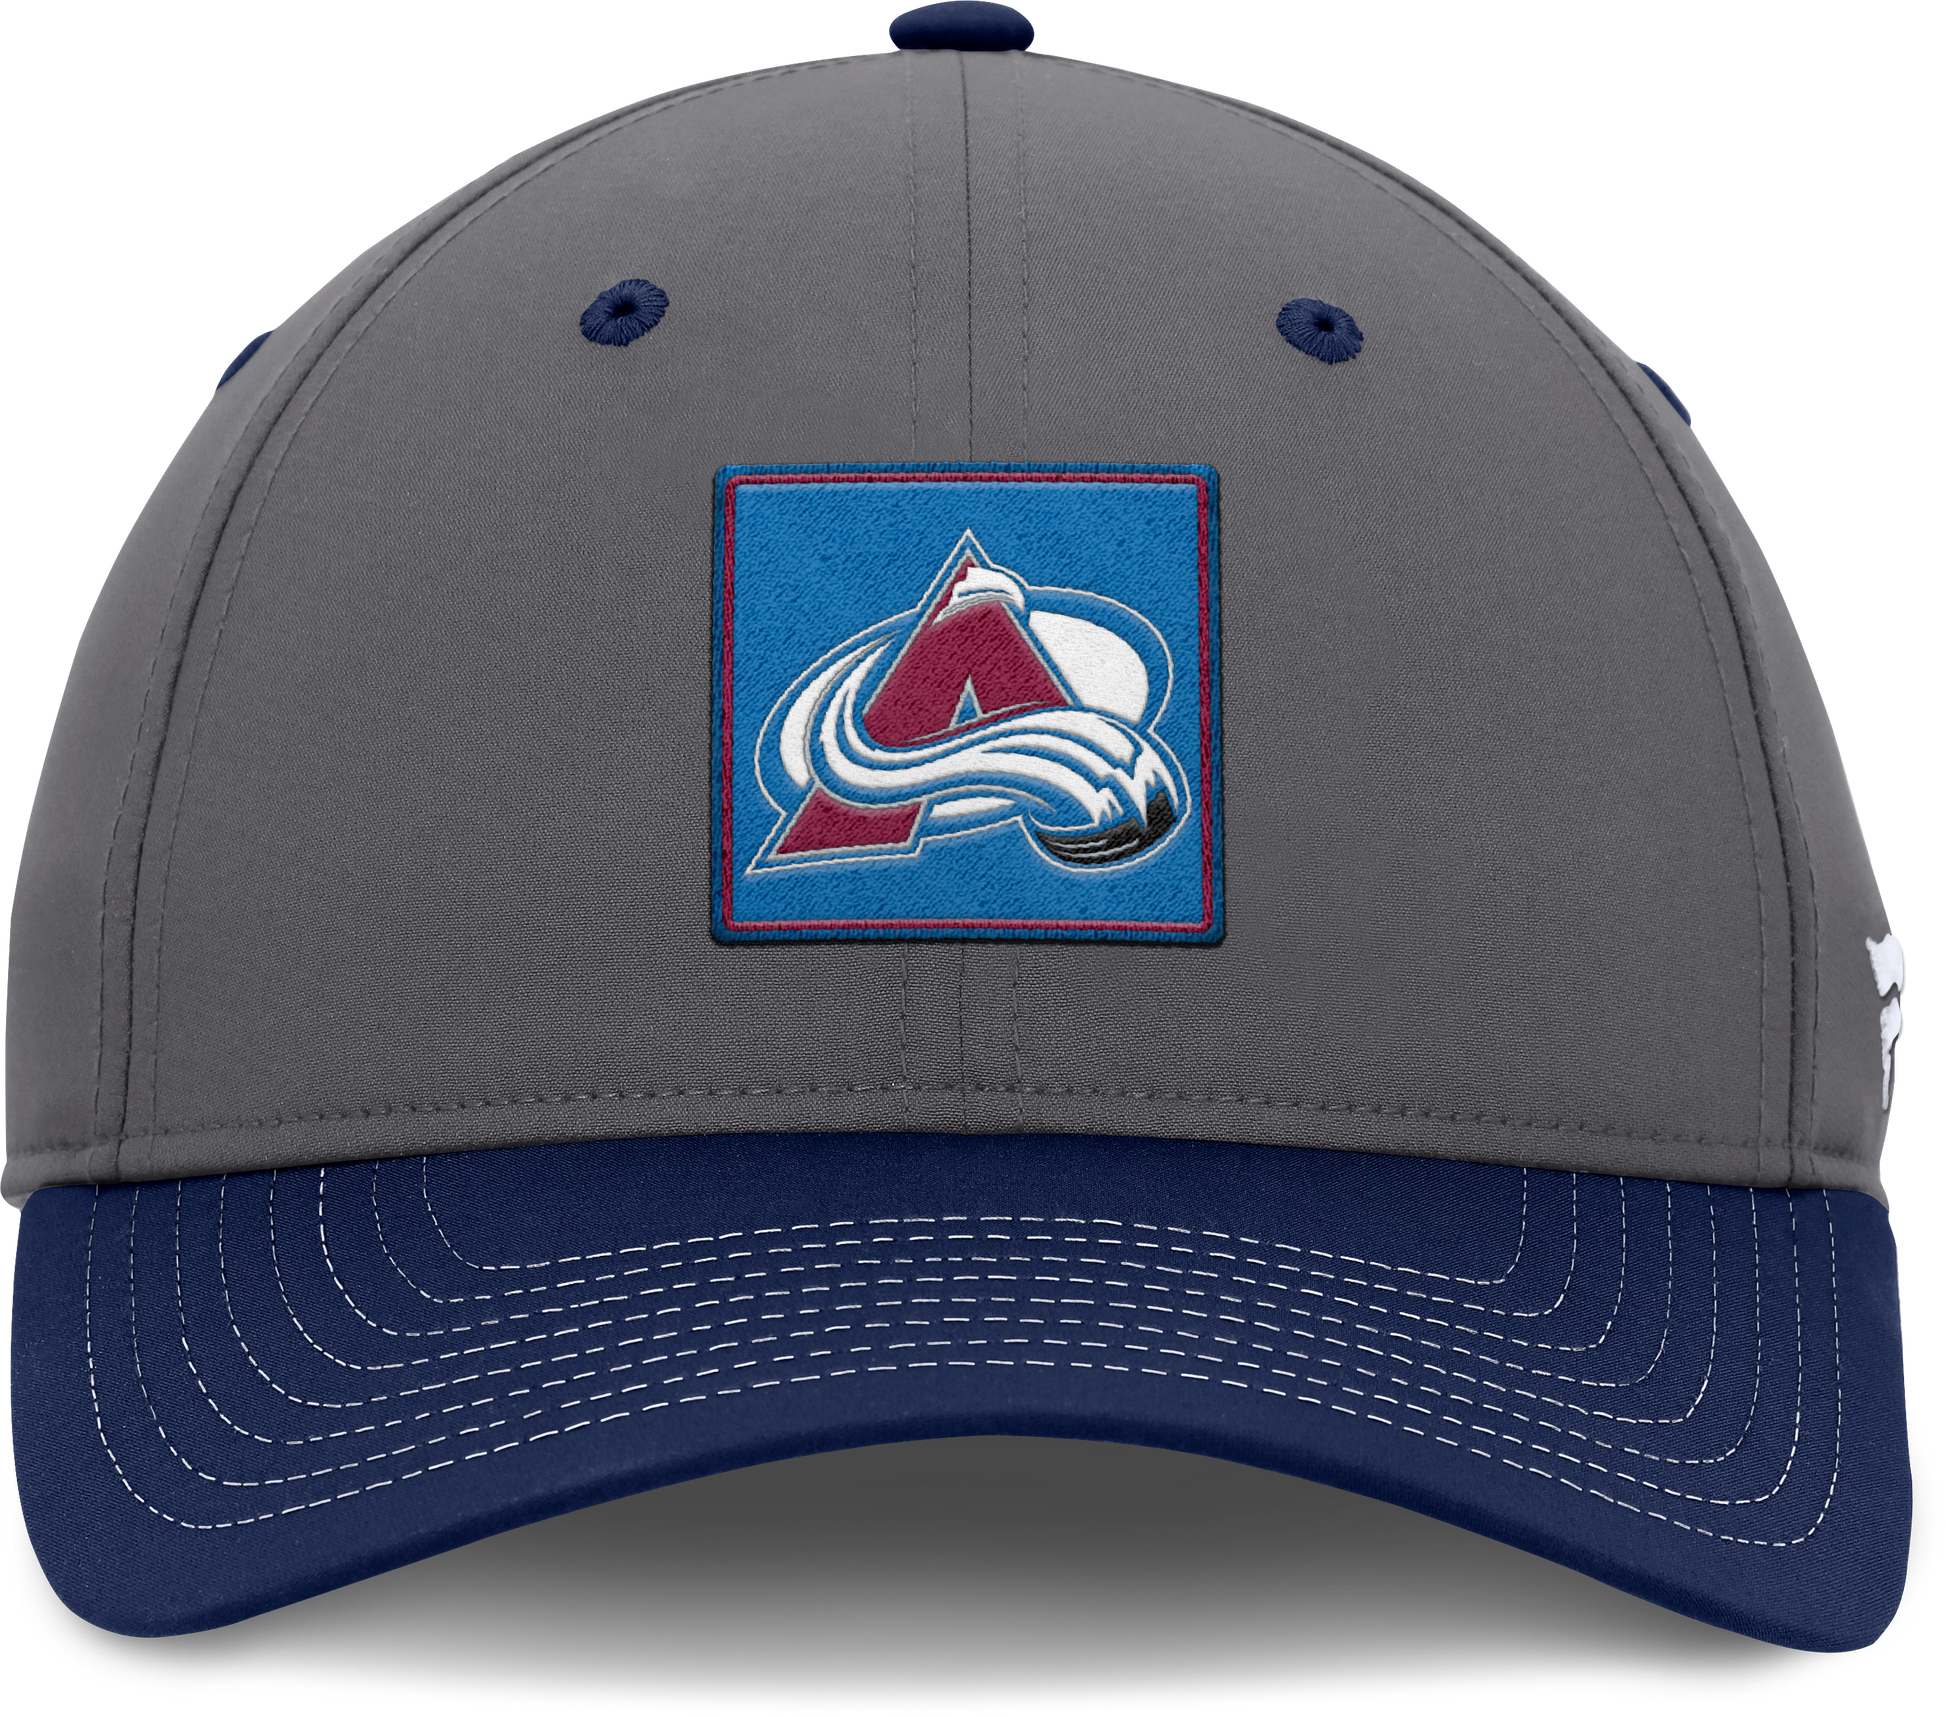 Blue square patch with Avs logo in middle on a grey hat with a navy blue bill